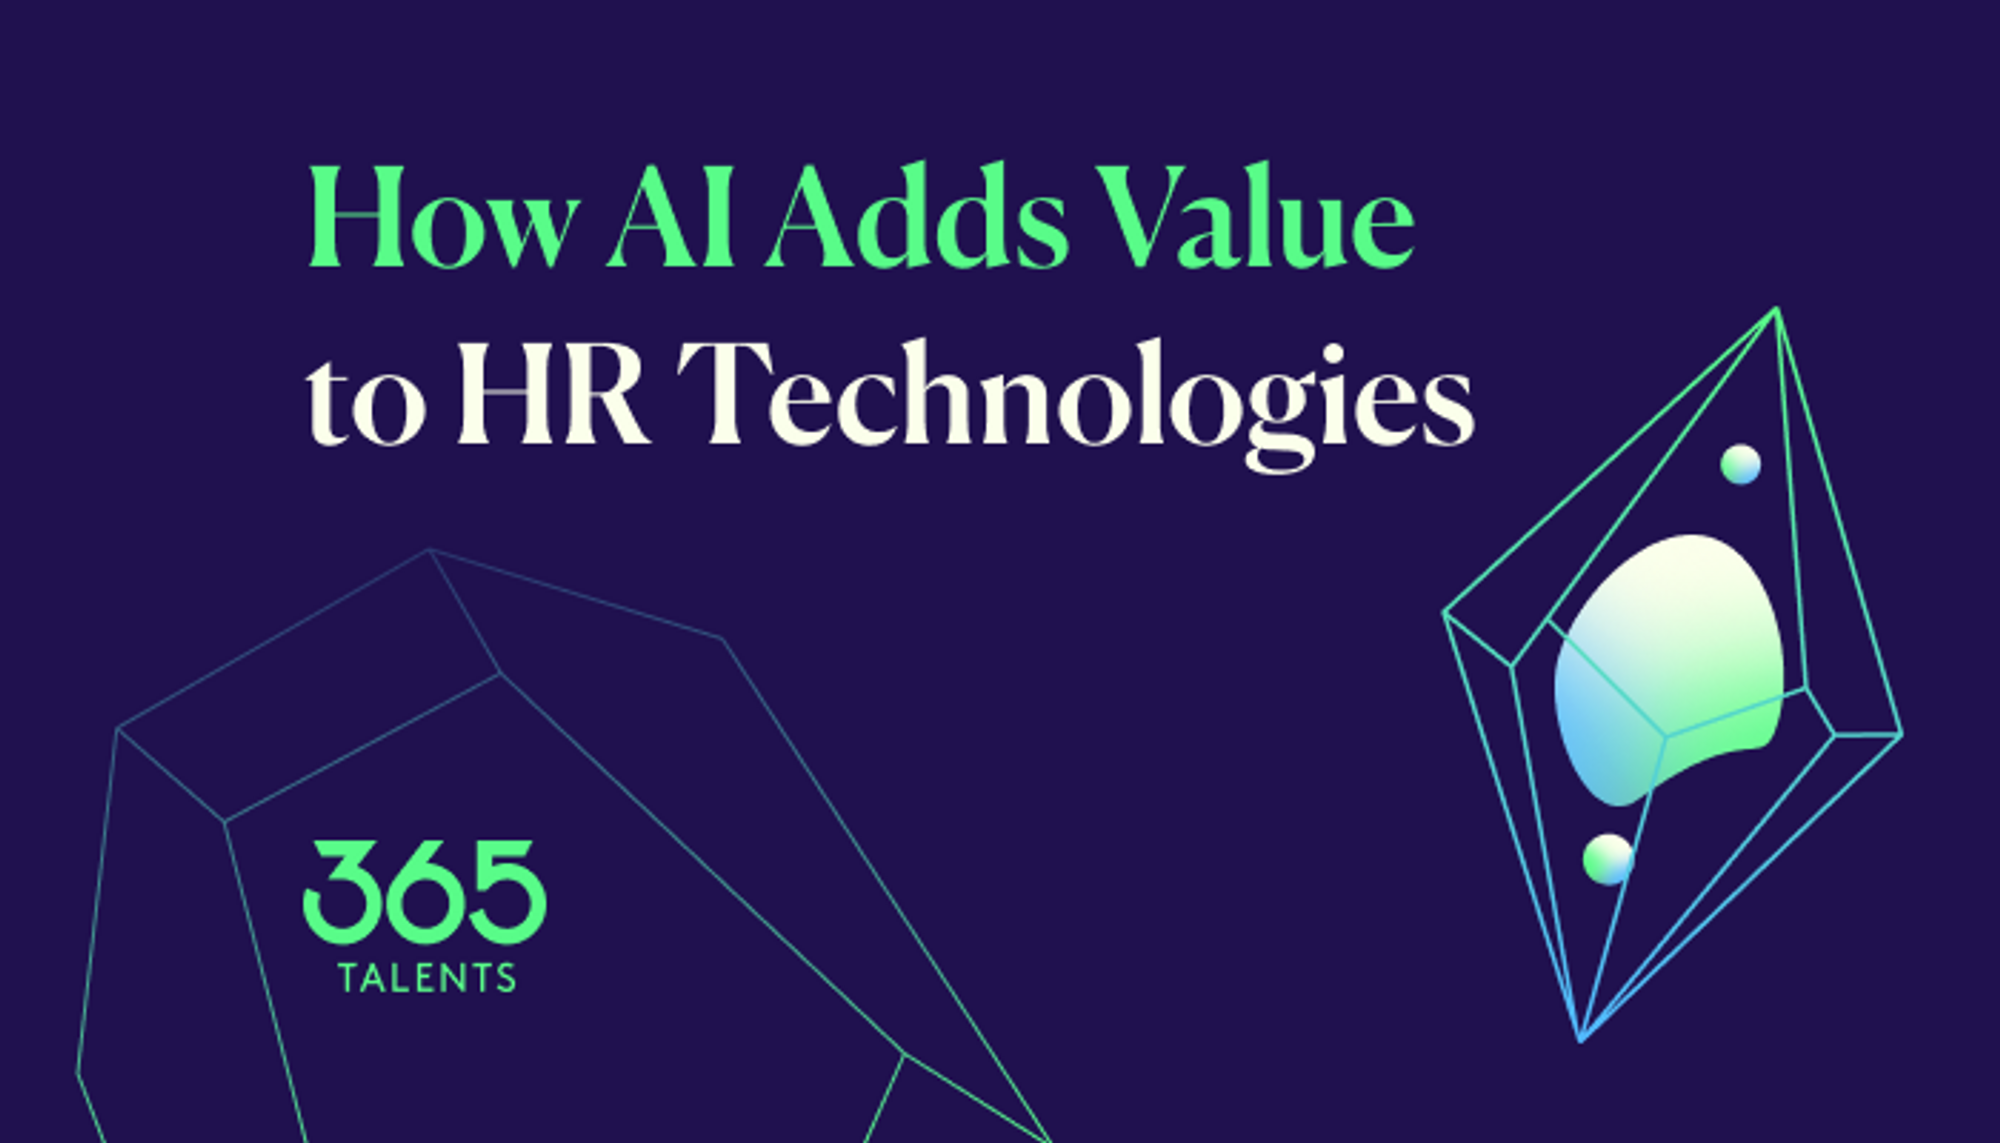 Impact of AI in HR